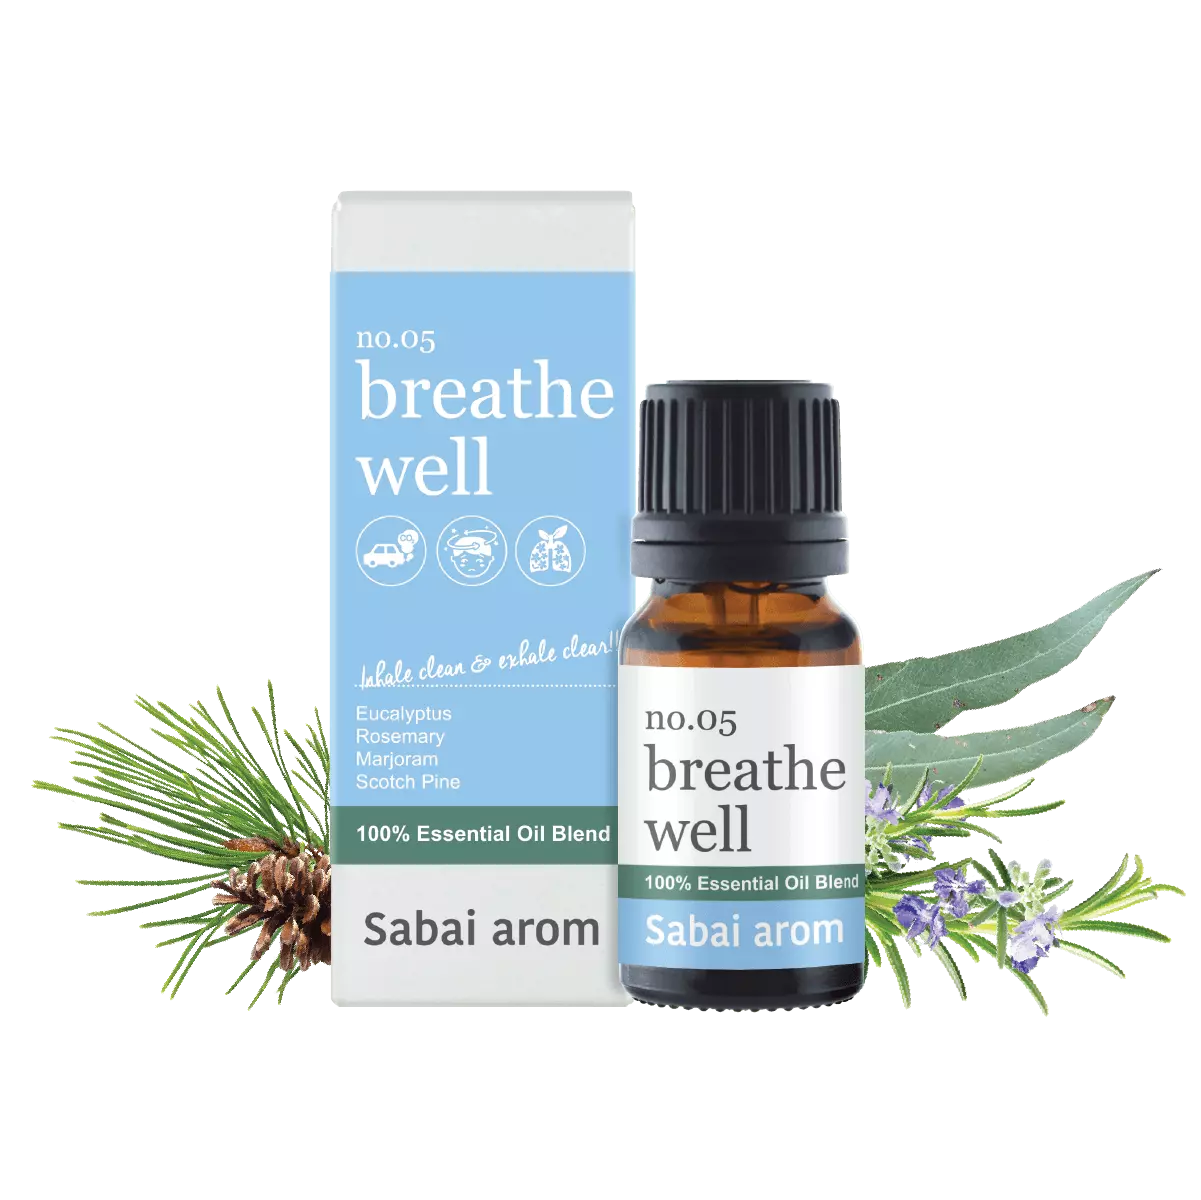 essential oil no05 breathe well 1 <h2>Like standing on the mountain top.</h2> Where pure and cool air are the gifts that everyone can breathe in freely, Breathe Well is a cooling blend incorporating essential oils of Eucalyptus, Rosemary, Majoram, Scotch Pine and Spearmint to be your harmless nasal unblock pal you should reach whenever dealing with stuffy nose. It provides soothing and nose-clearing effects to make your airways totally smooth be it breathing in or breathing out. The blend is created to be a very good alternative and completely safe natural solution to replace those synthetic inhalants. <strong>Scent</strong> : Like standing on a mountaintop breathing in pure Oxygen and looking down to a grass field and distantly beautiful hilled coverved with green pine trees and thin snow. The sky above is true blue and the cool wind blows mildly.